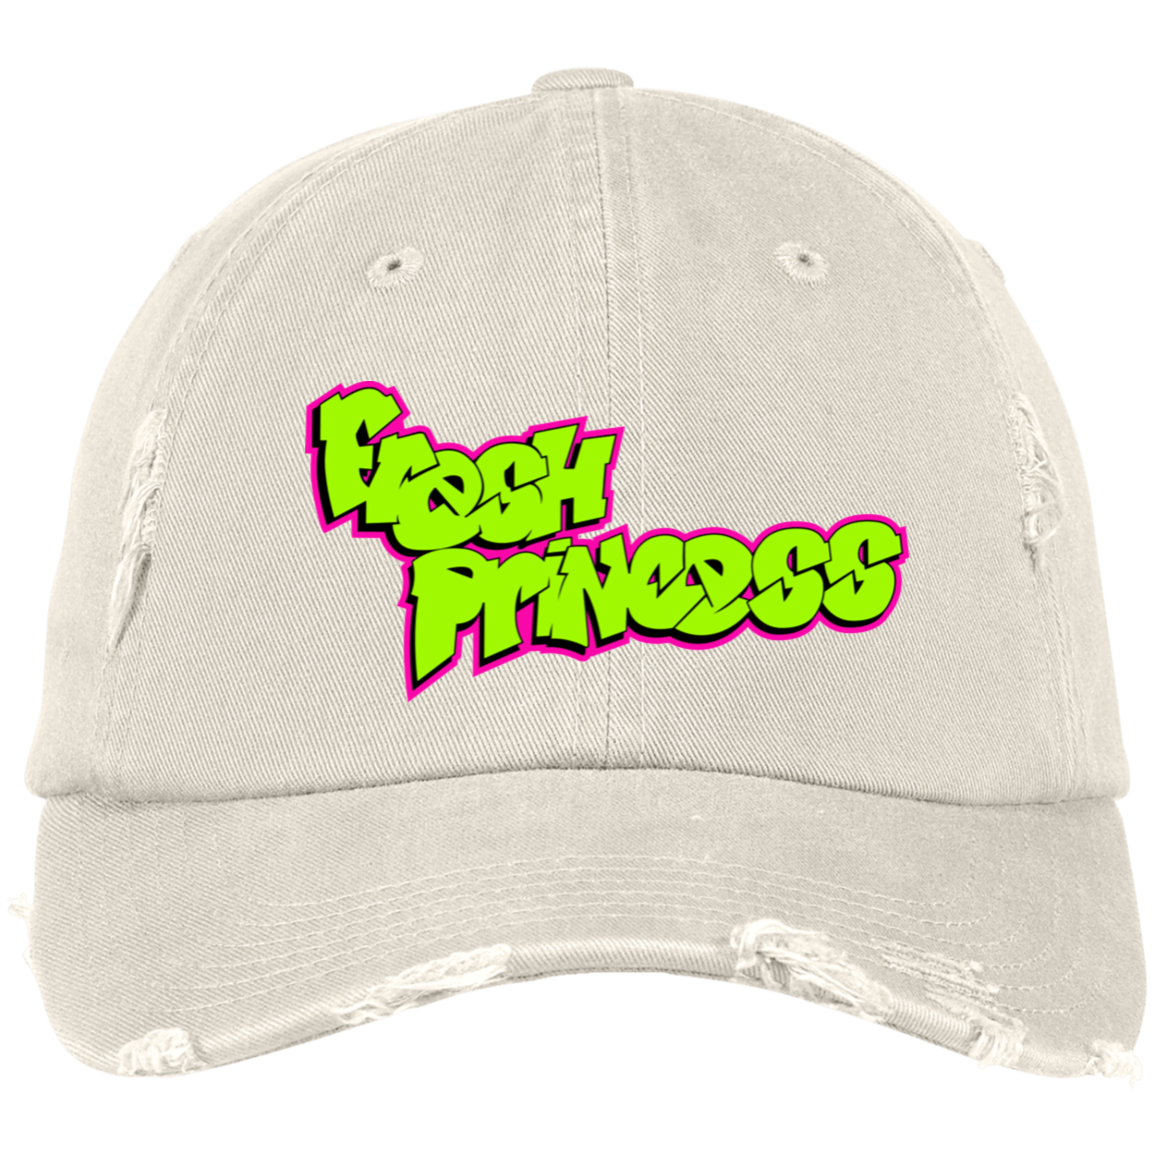 Princess Embroidered Distressed Dad Cap